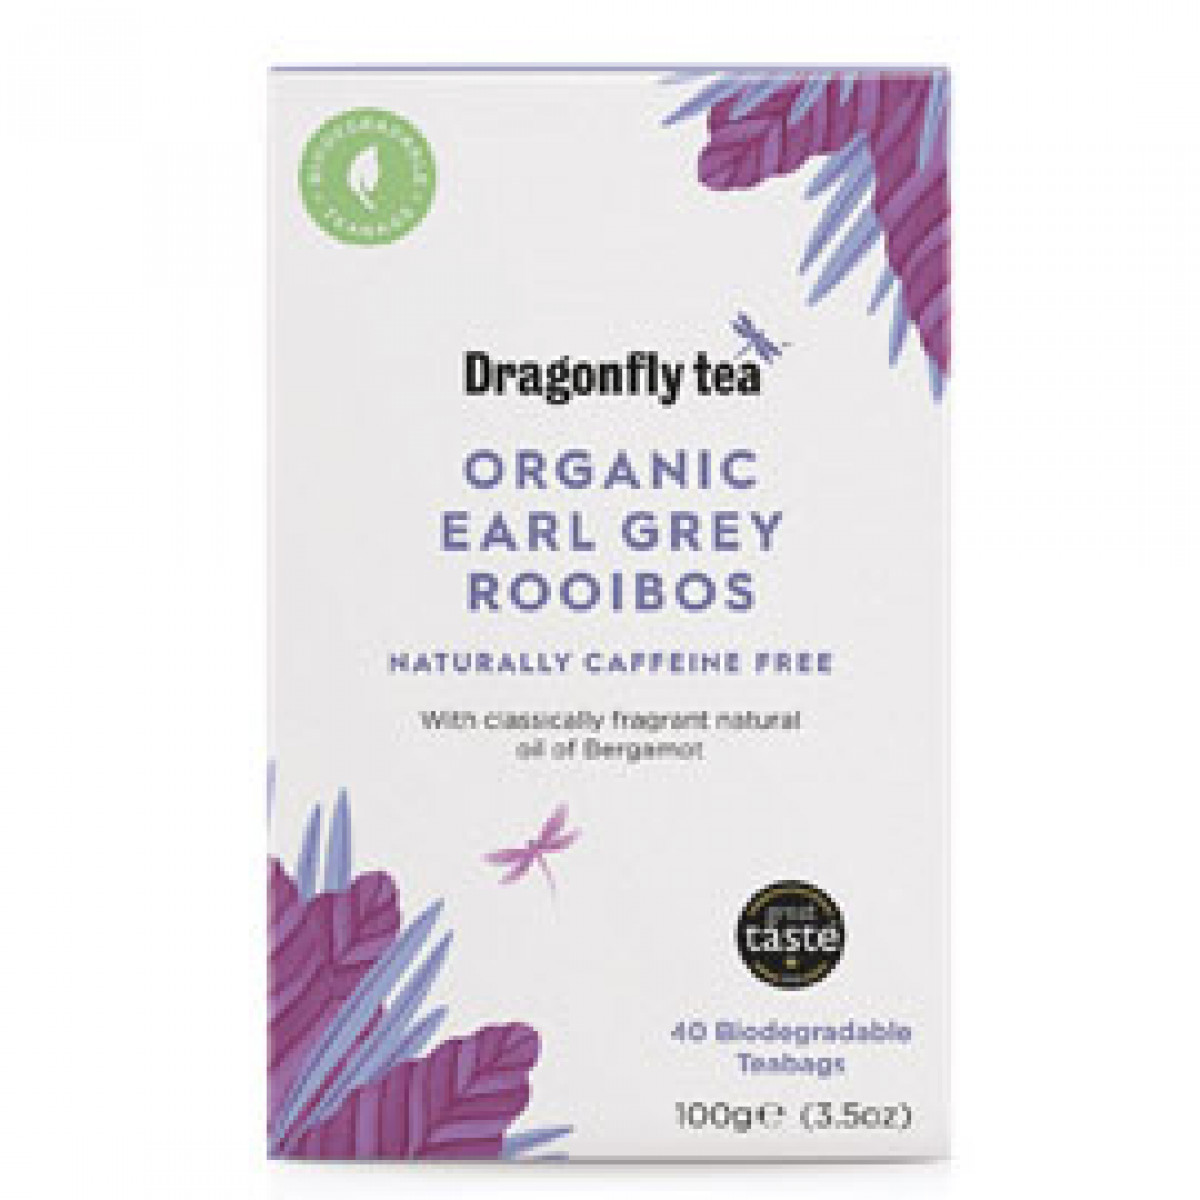 Product picture for Rooibos Earl Grey